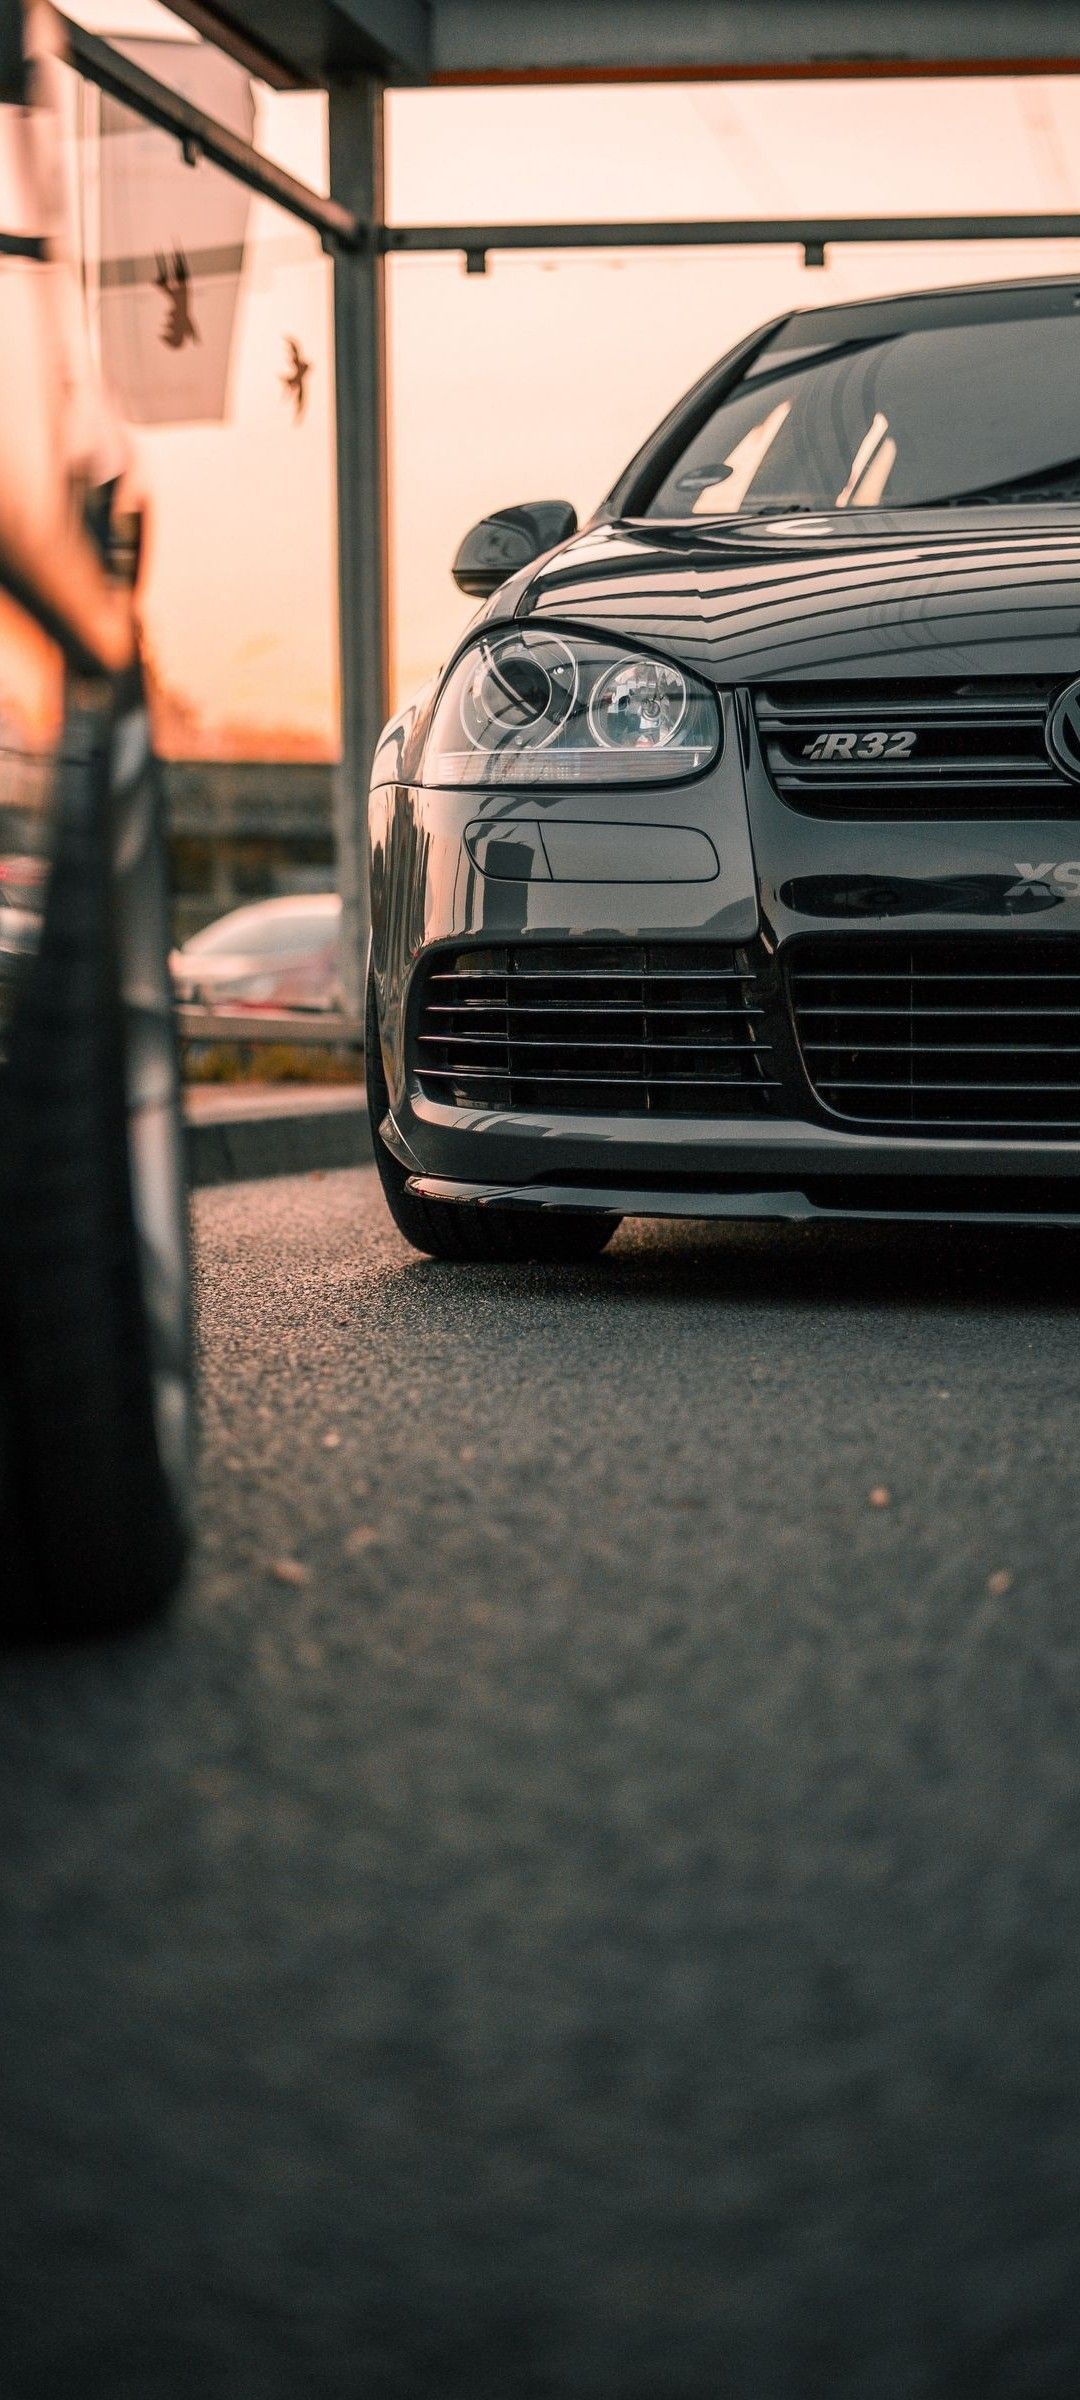 Volkswagen Jetta, Top free backgrounds, Stylish and elegant, Perfect for your iPhone, 1080x2400 HD Handy